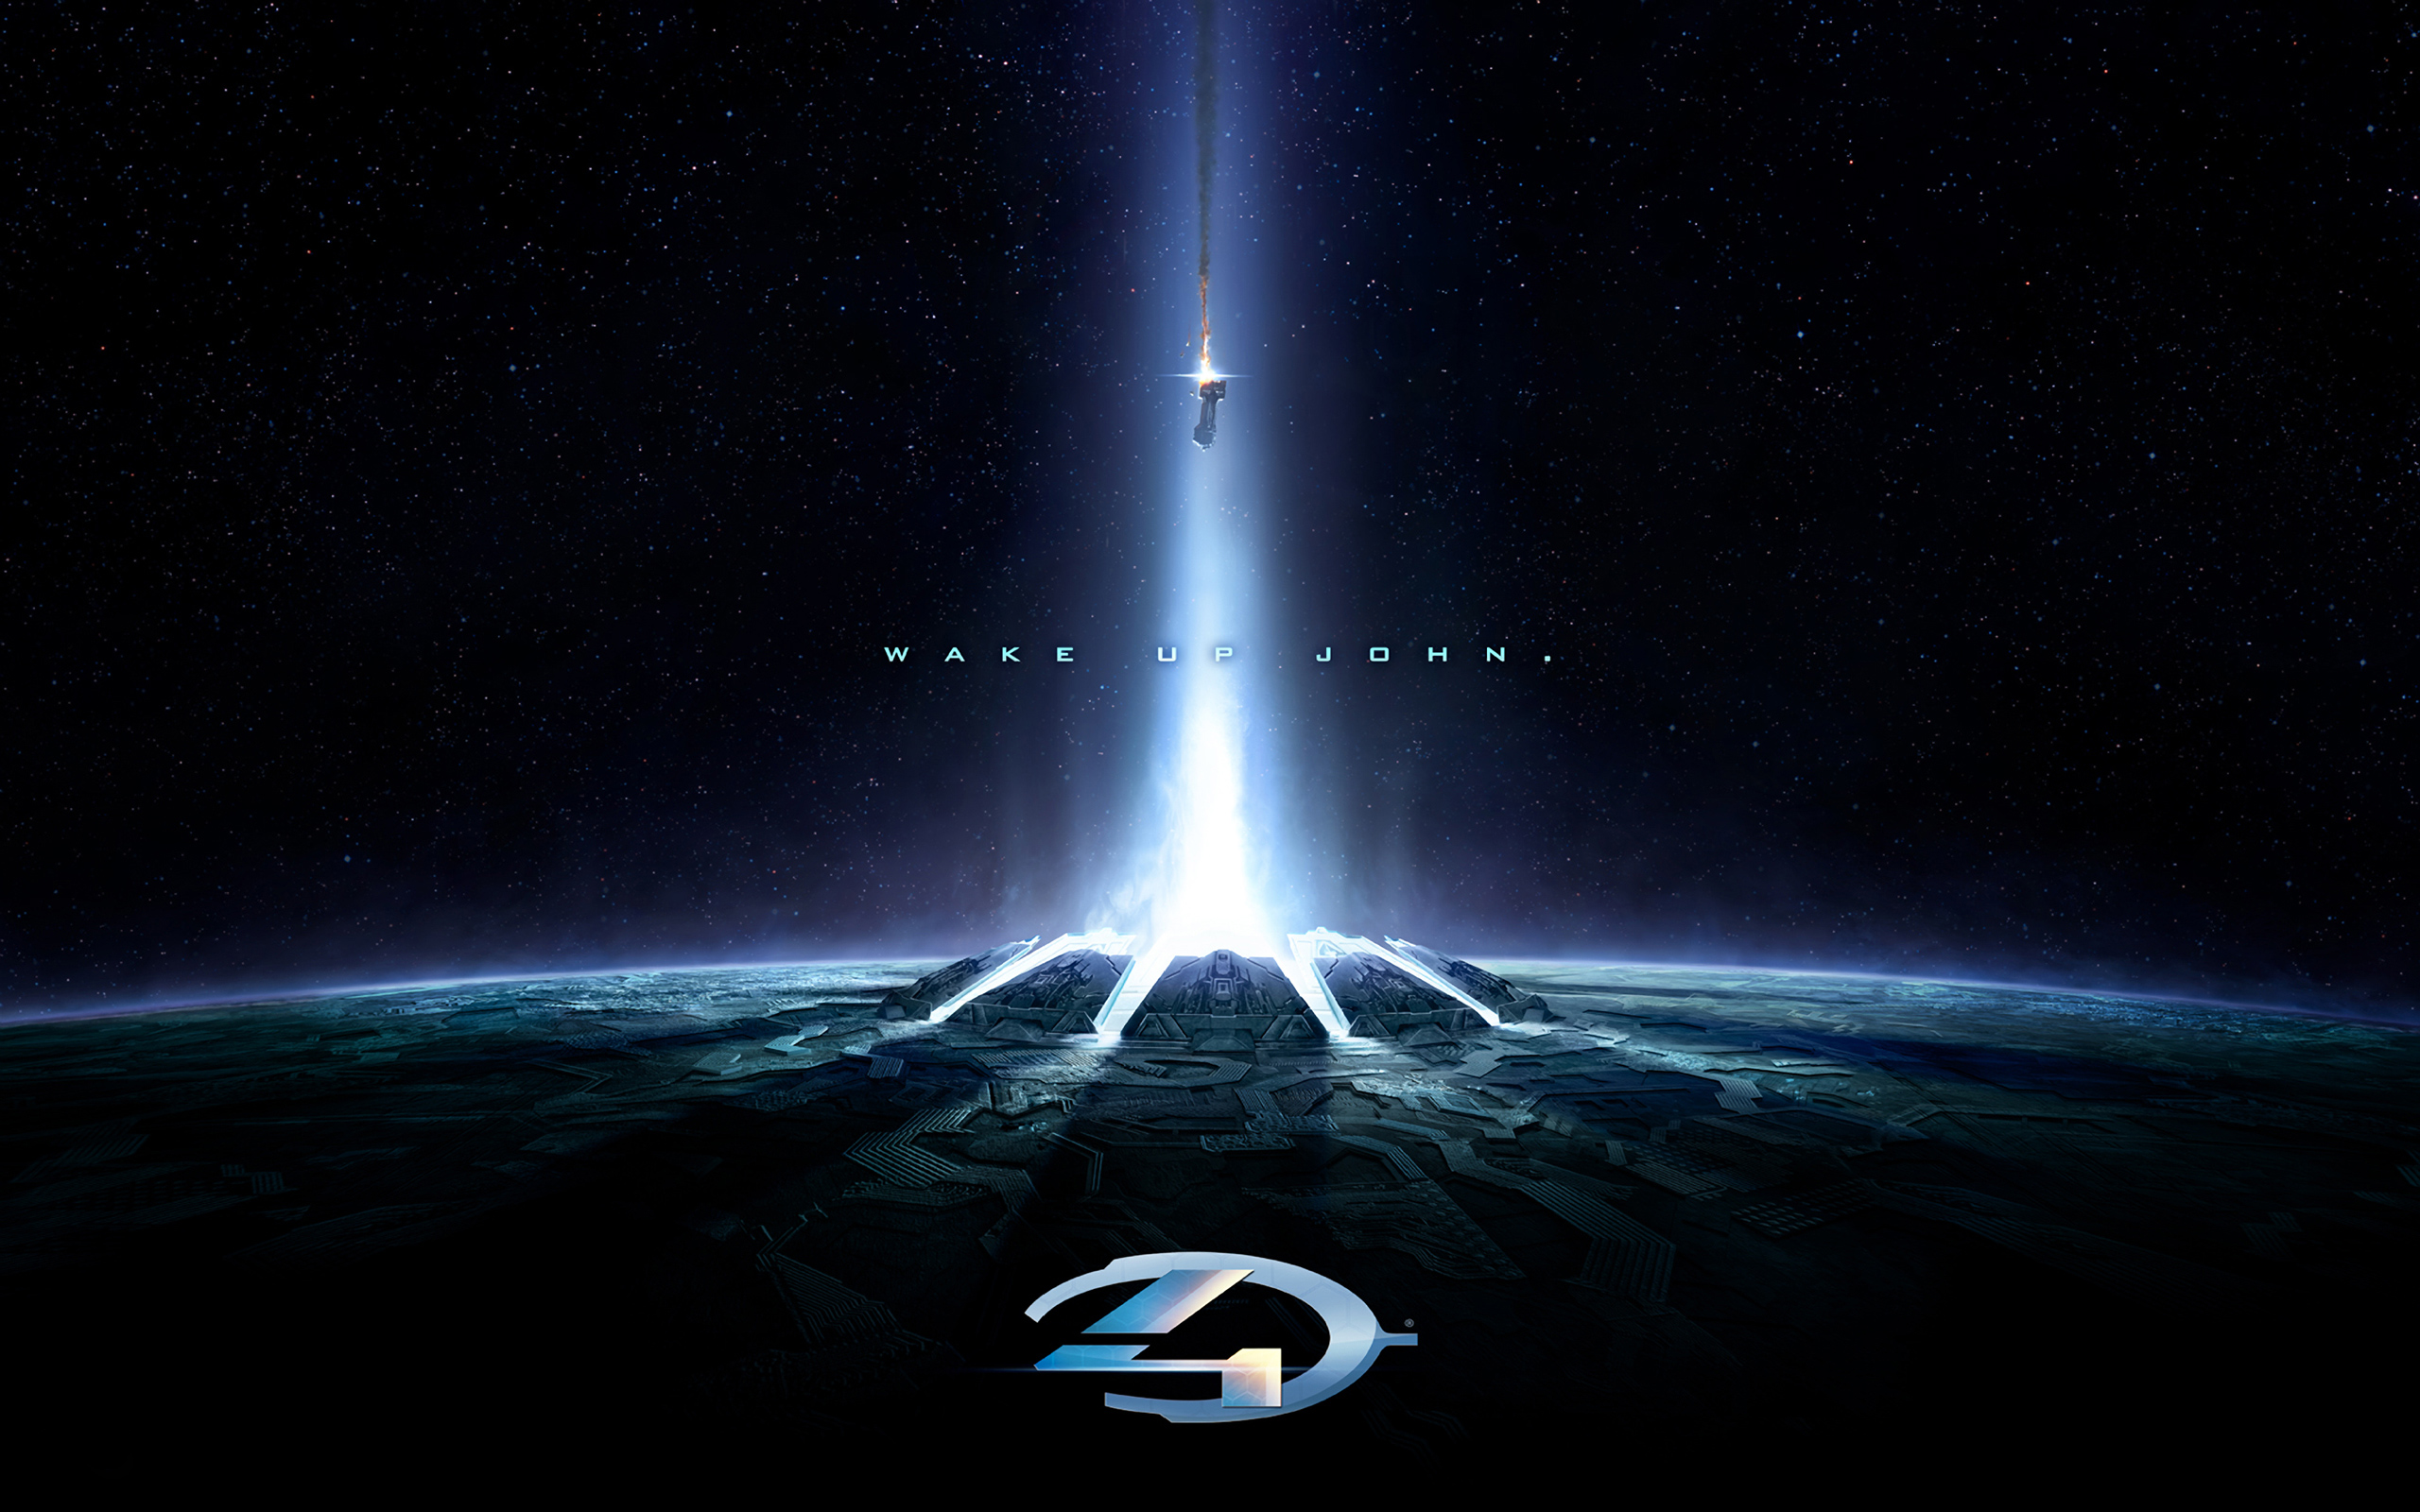 Halo 4 2012 Wallpapers HD Wallpapers 2560x1600